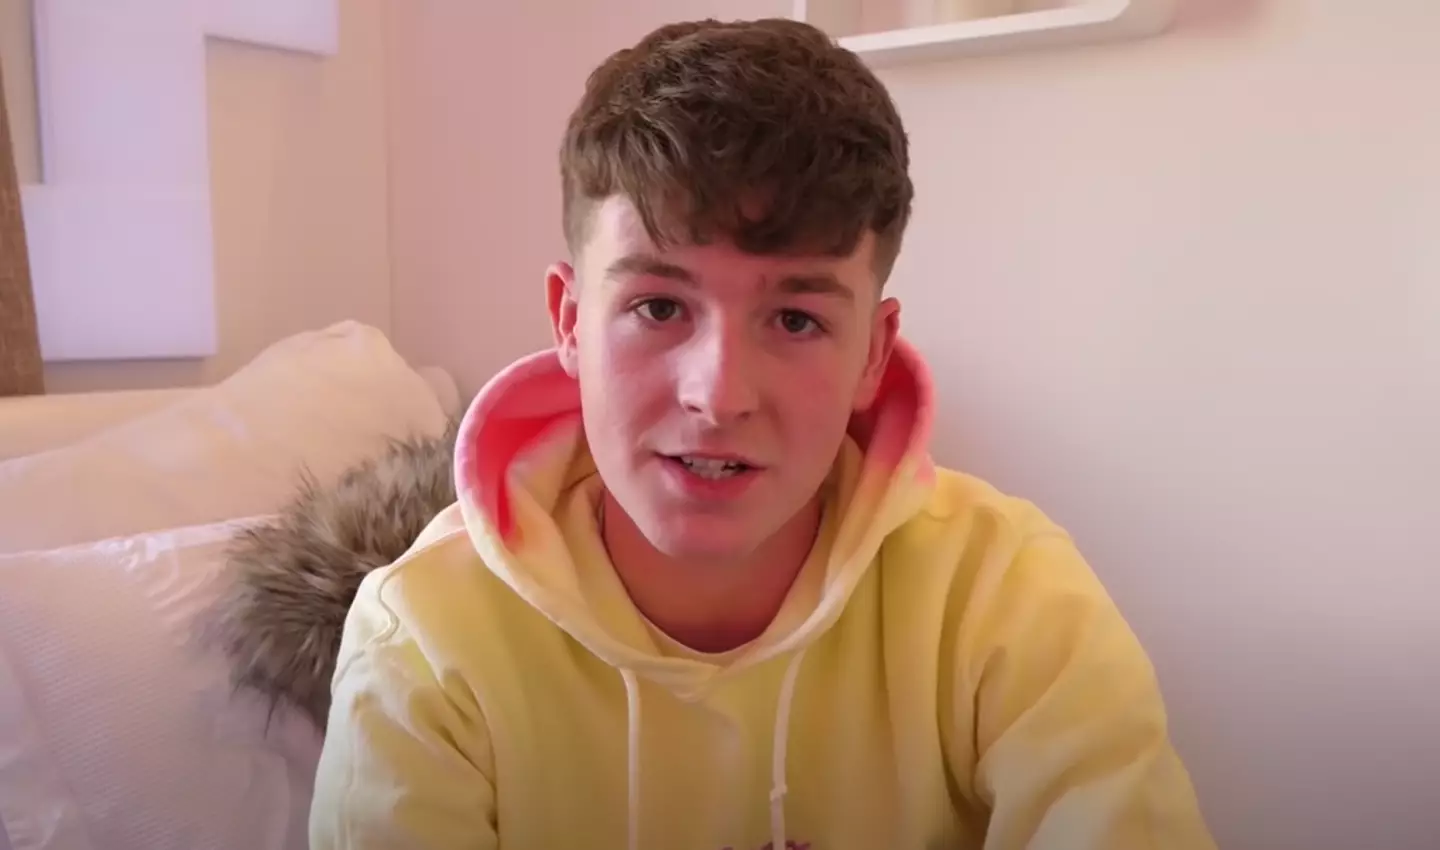 YouTuber Adam Beales revealed his surprise plan to buy his parents their dream house.